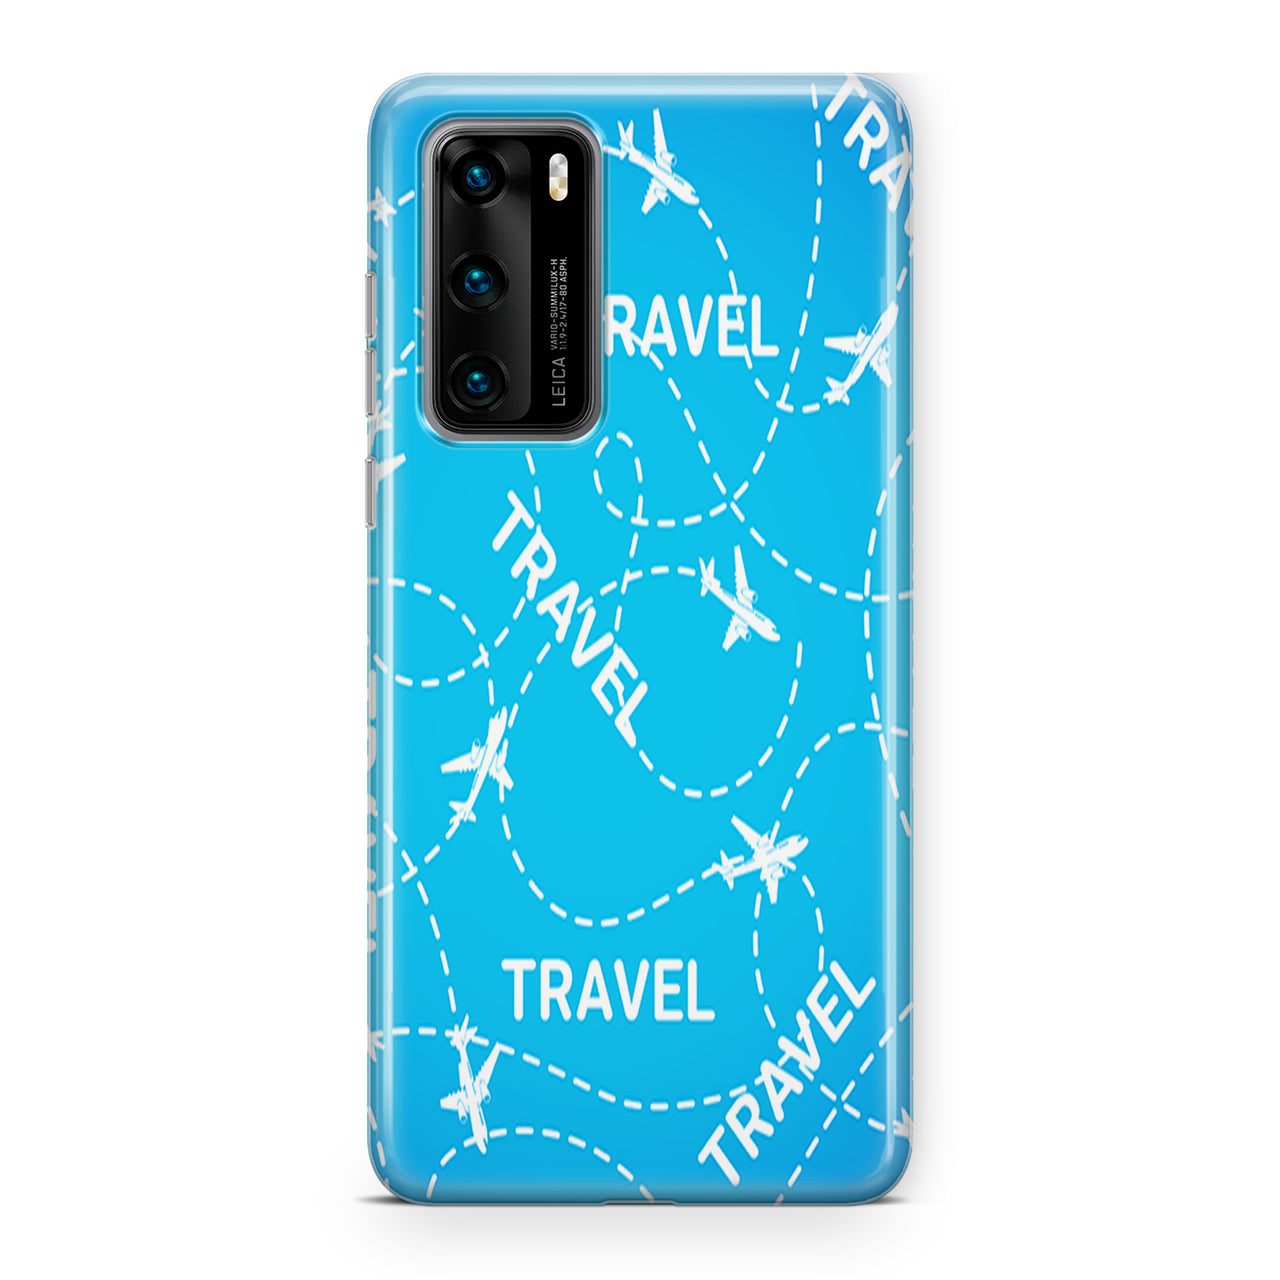 Travel & Planes Designed Huawei Cases